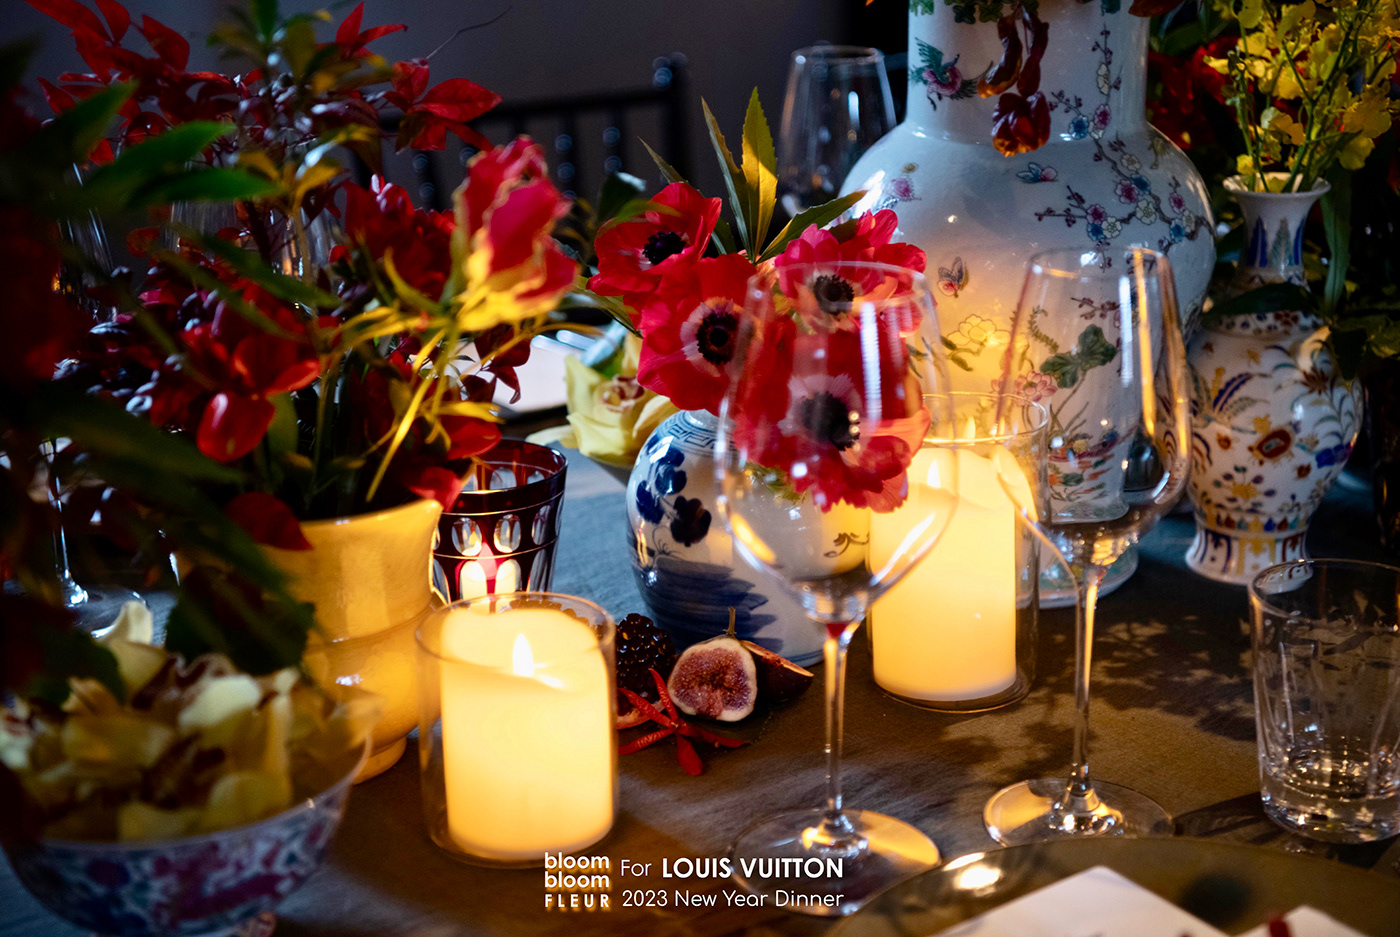 Flowers Louis vuitton luxury brand identity floral dinner Event party